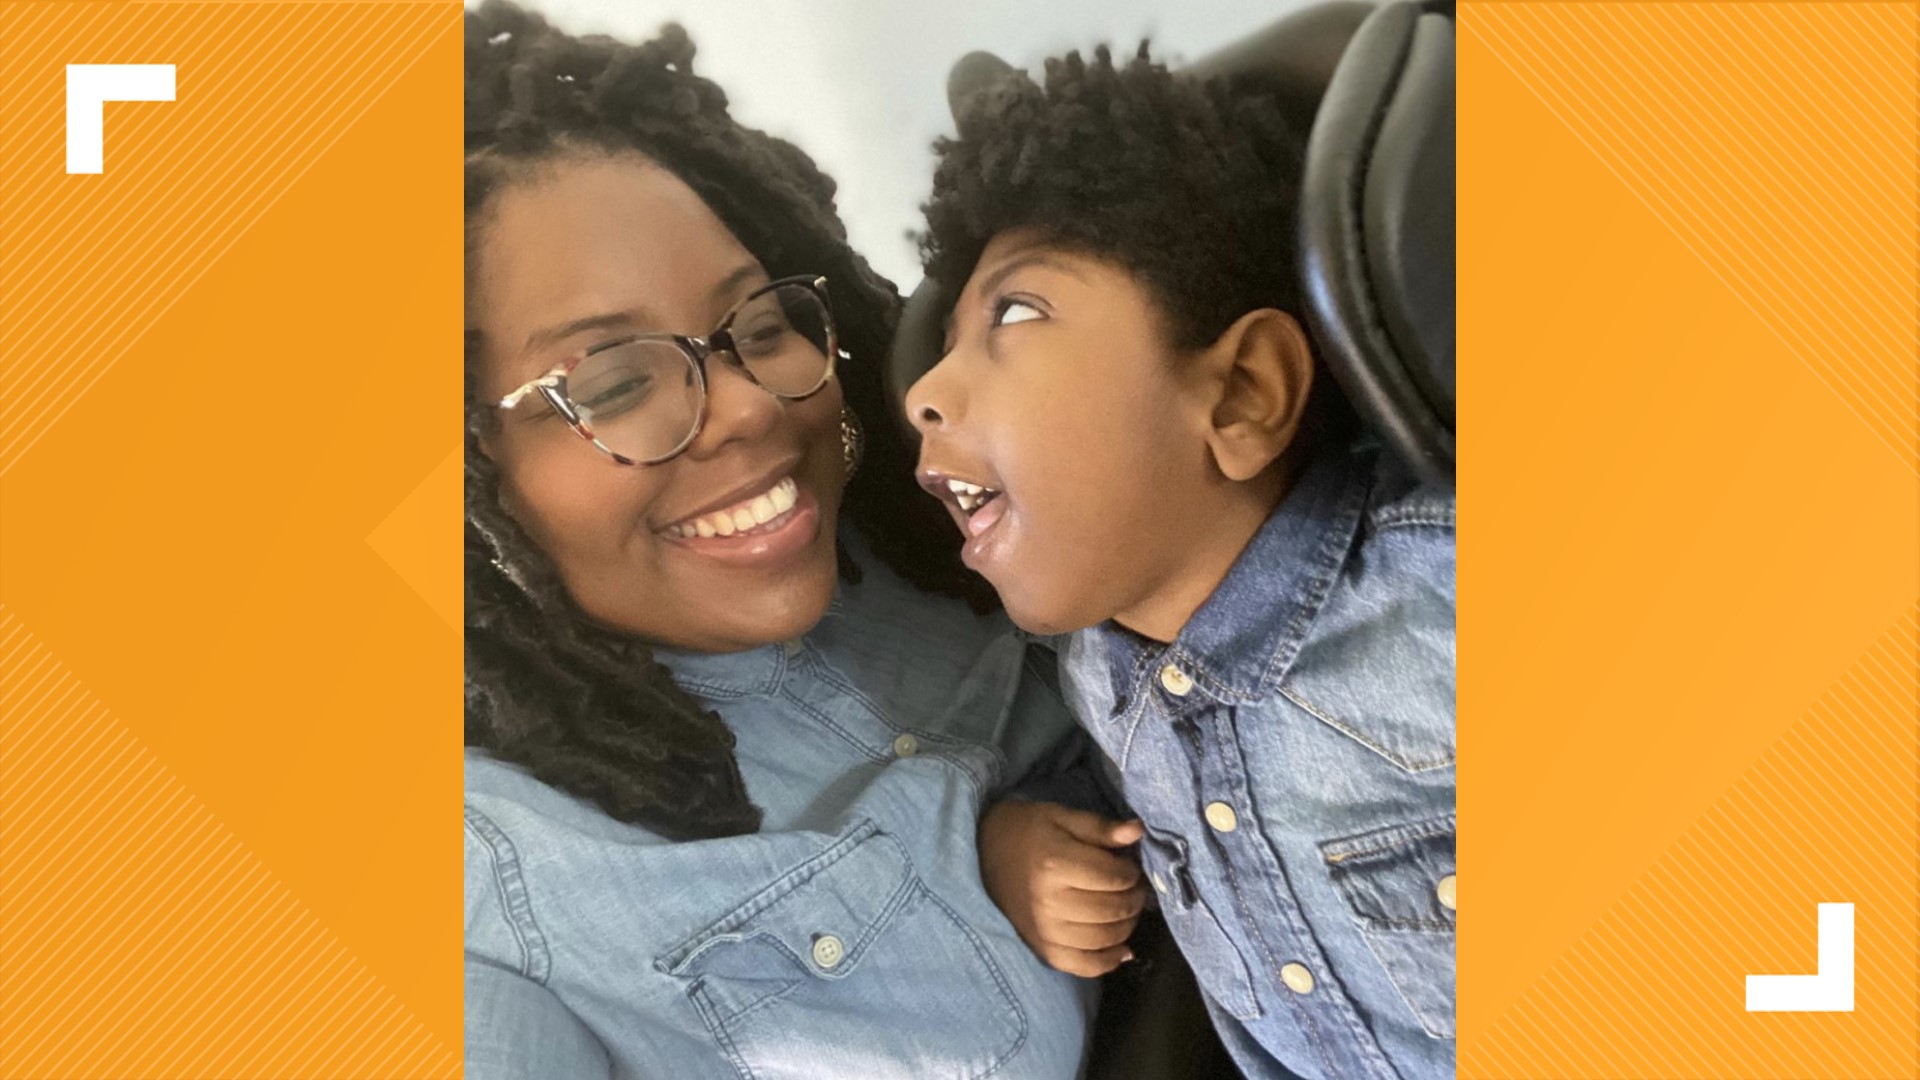 March is Cerebral Palsy Awareness Month. Chanita Stone is promoting the children's book she wrote about her son, Caleb Croffie, who lives with the disorder.